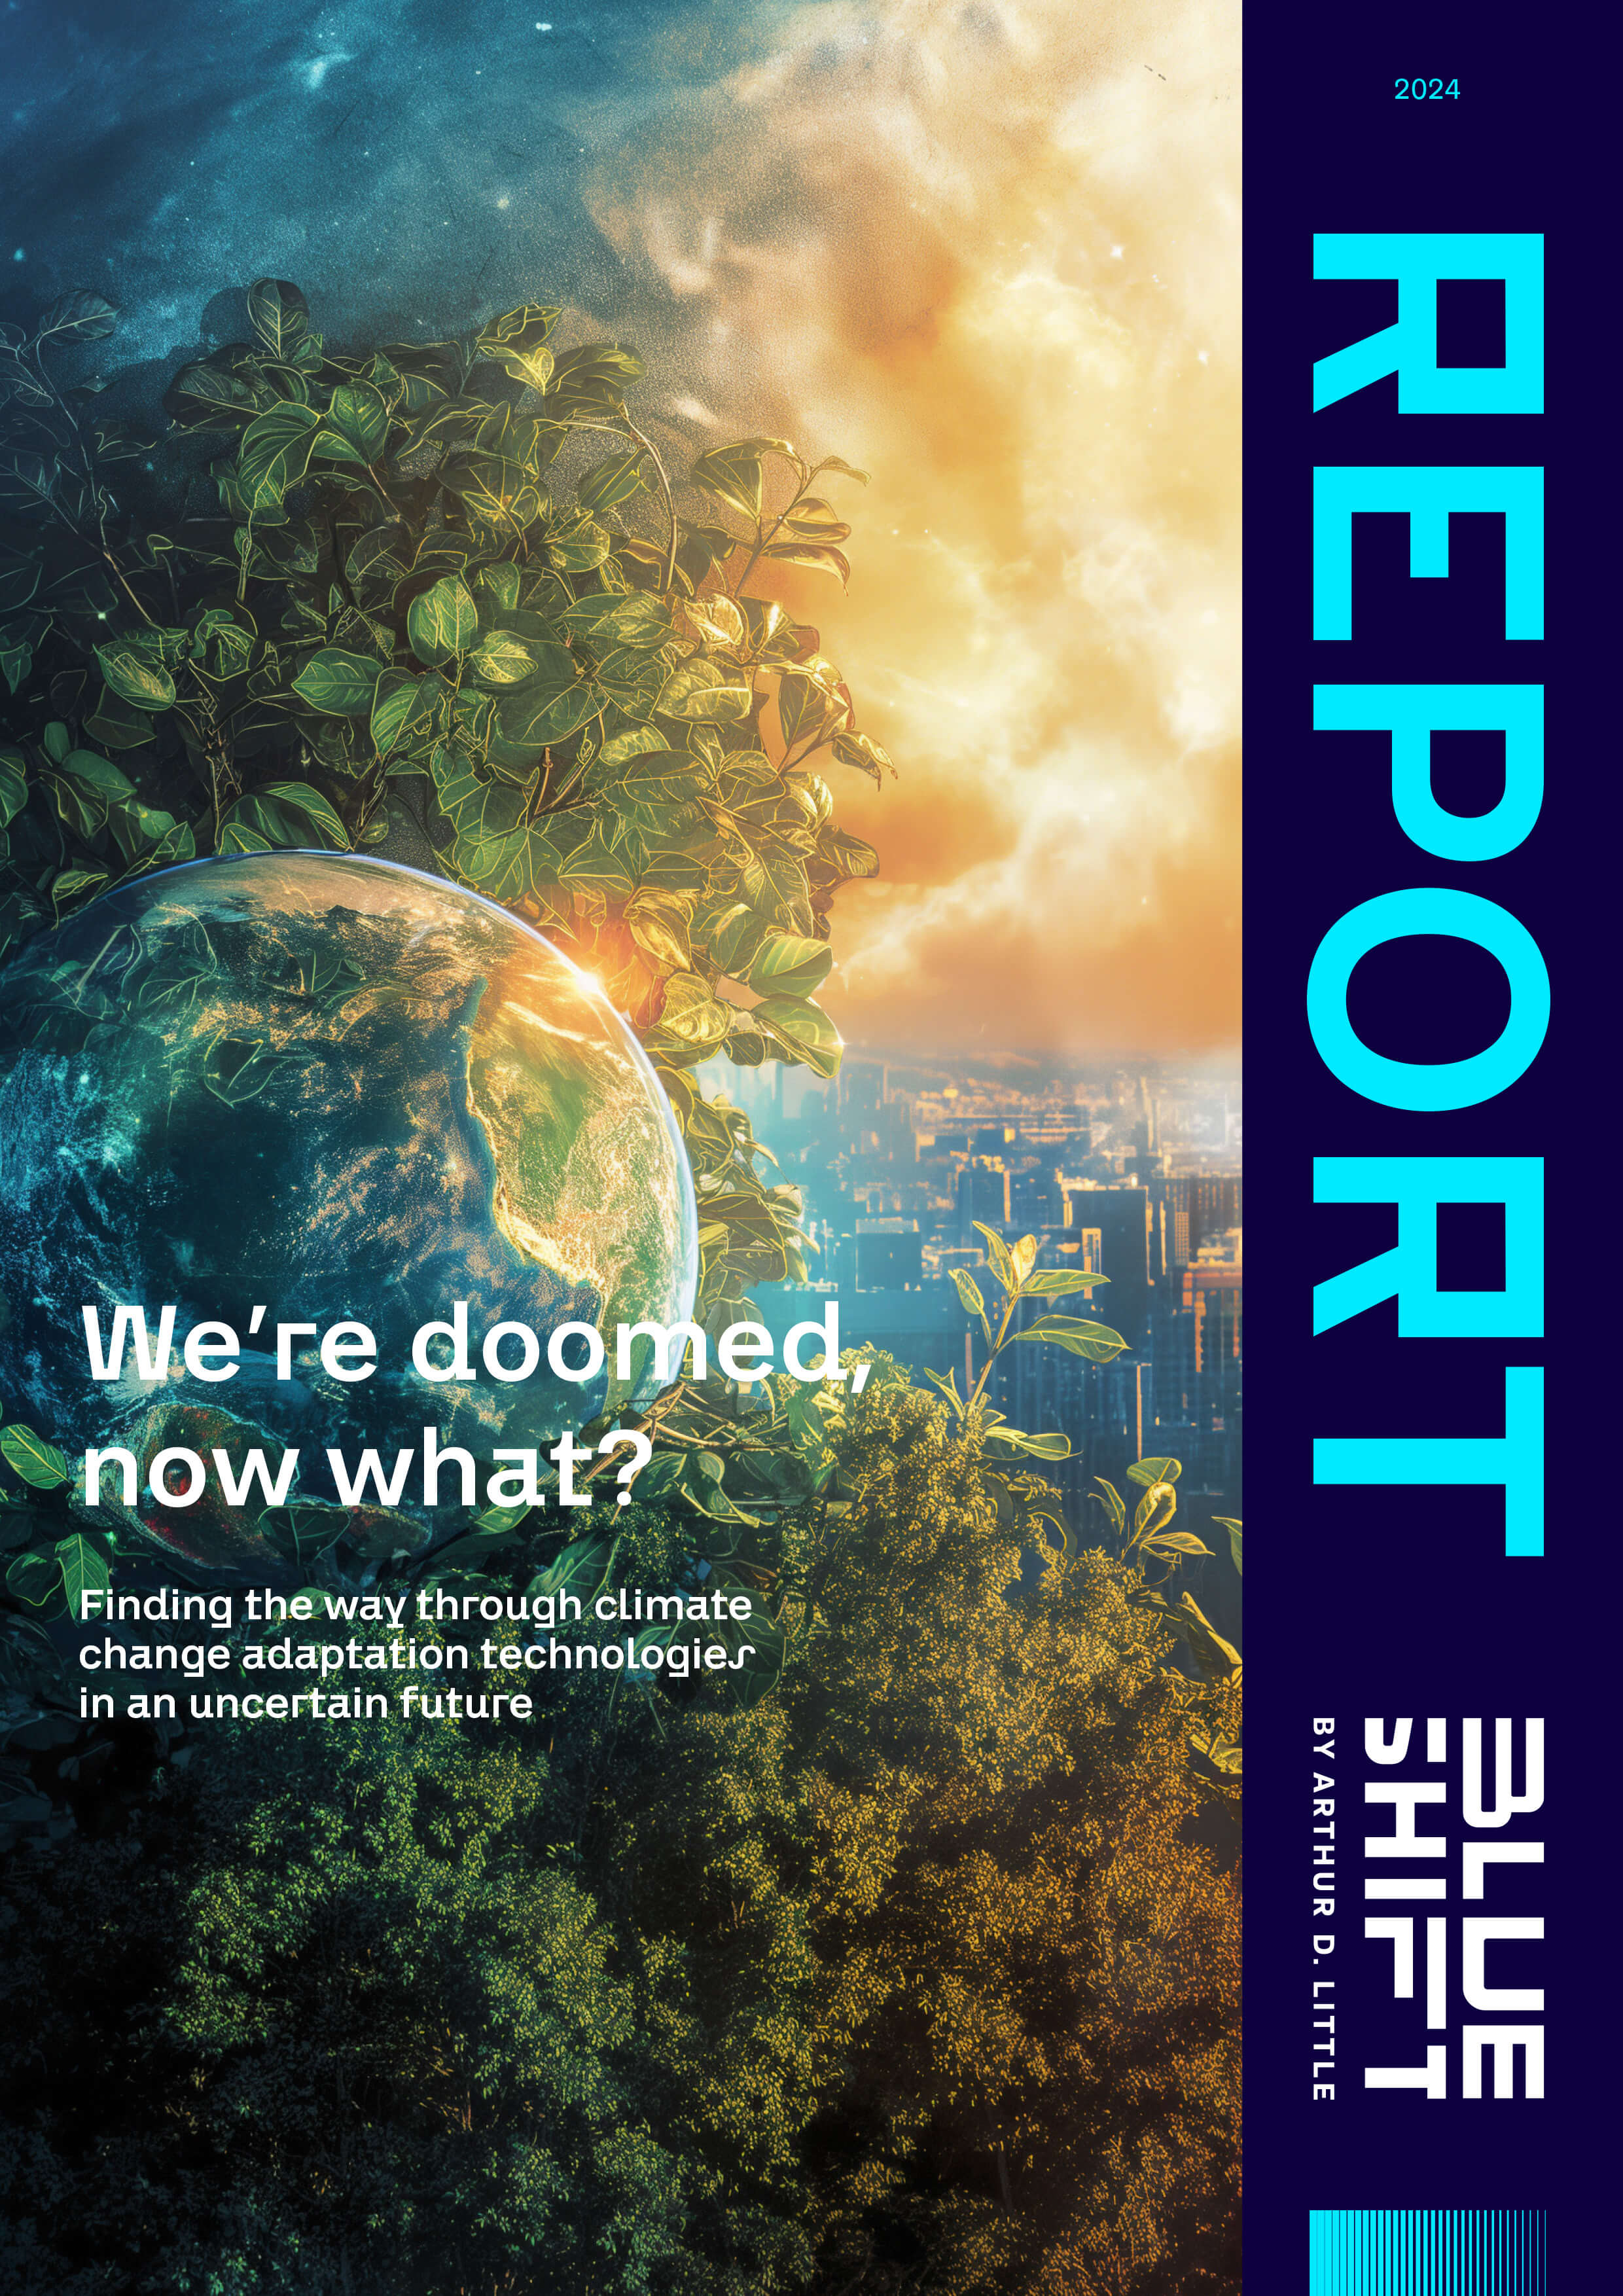 We’re doomed, now what? Report